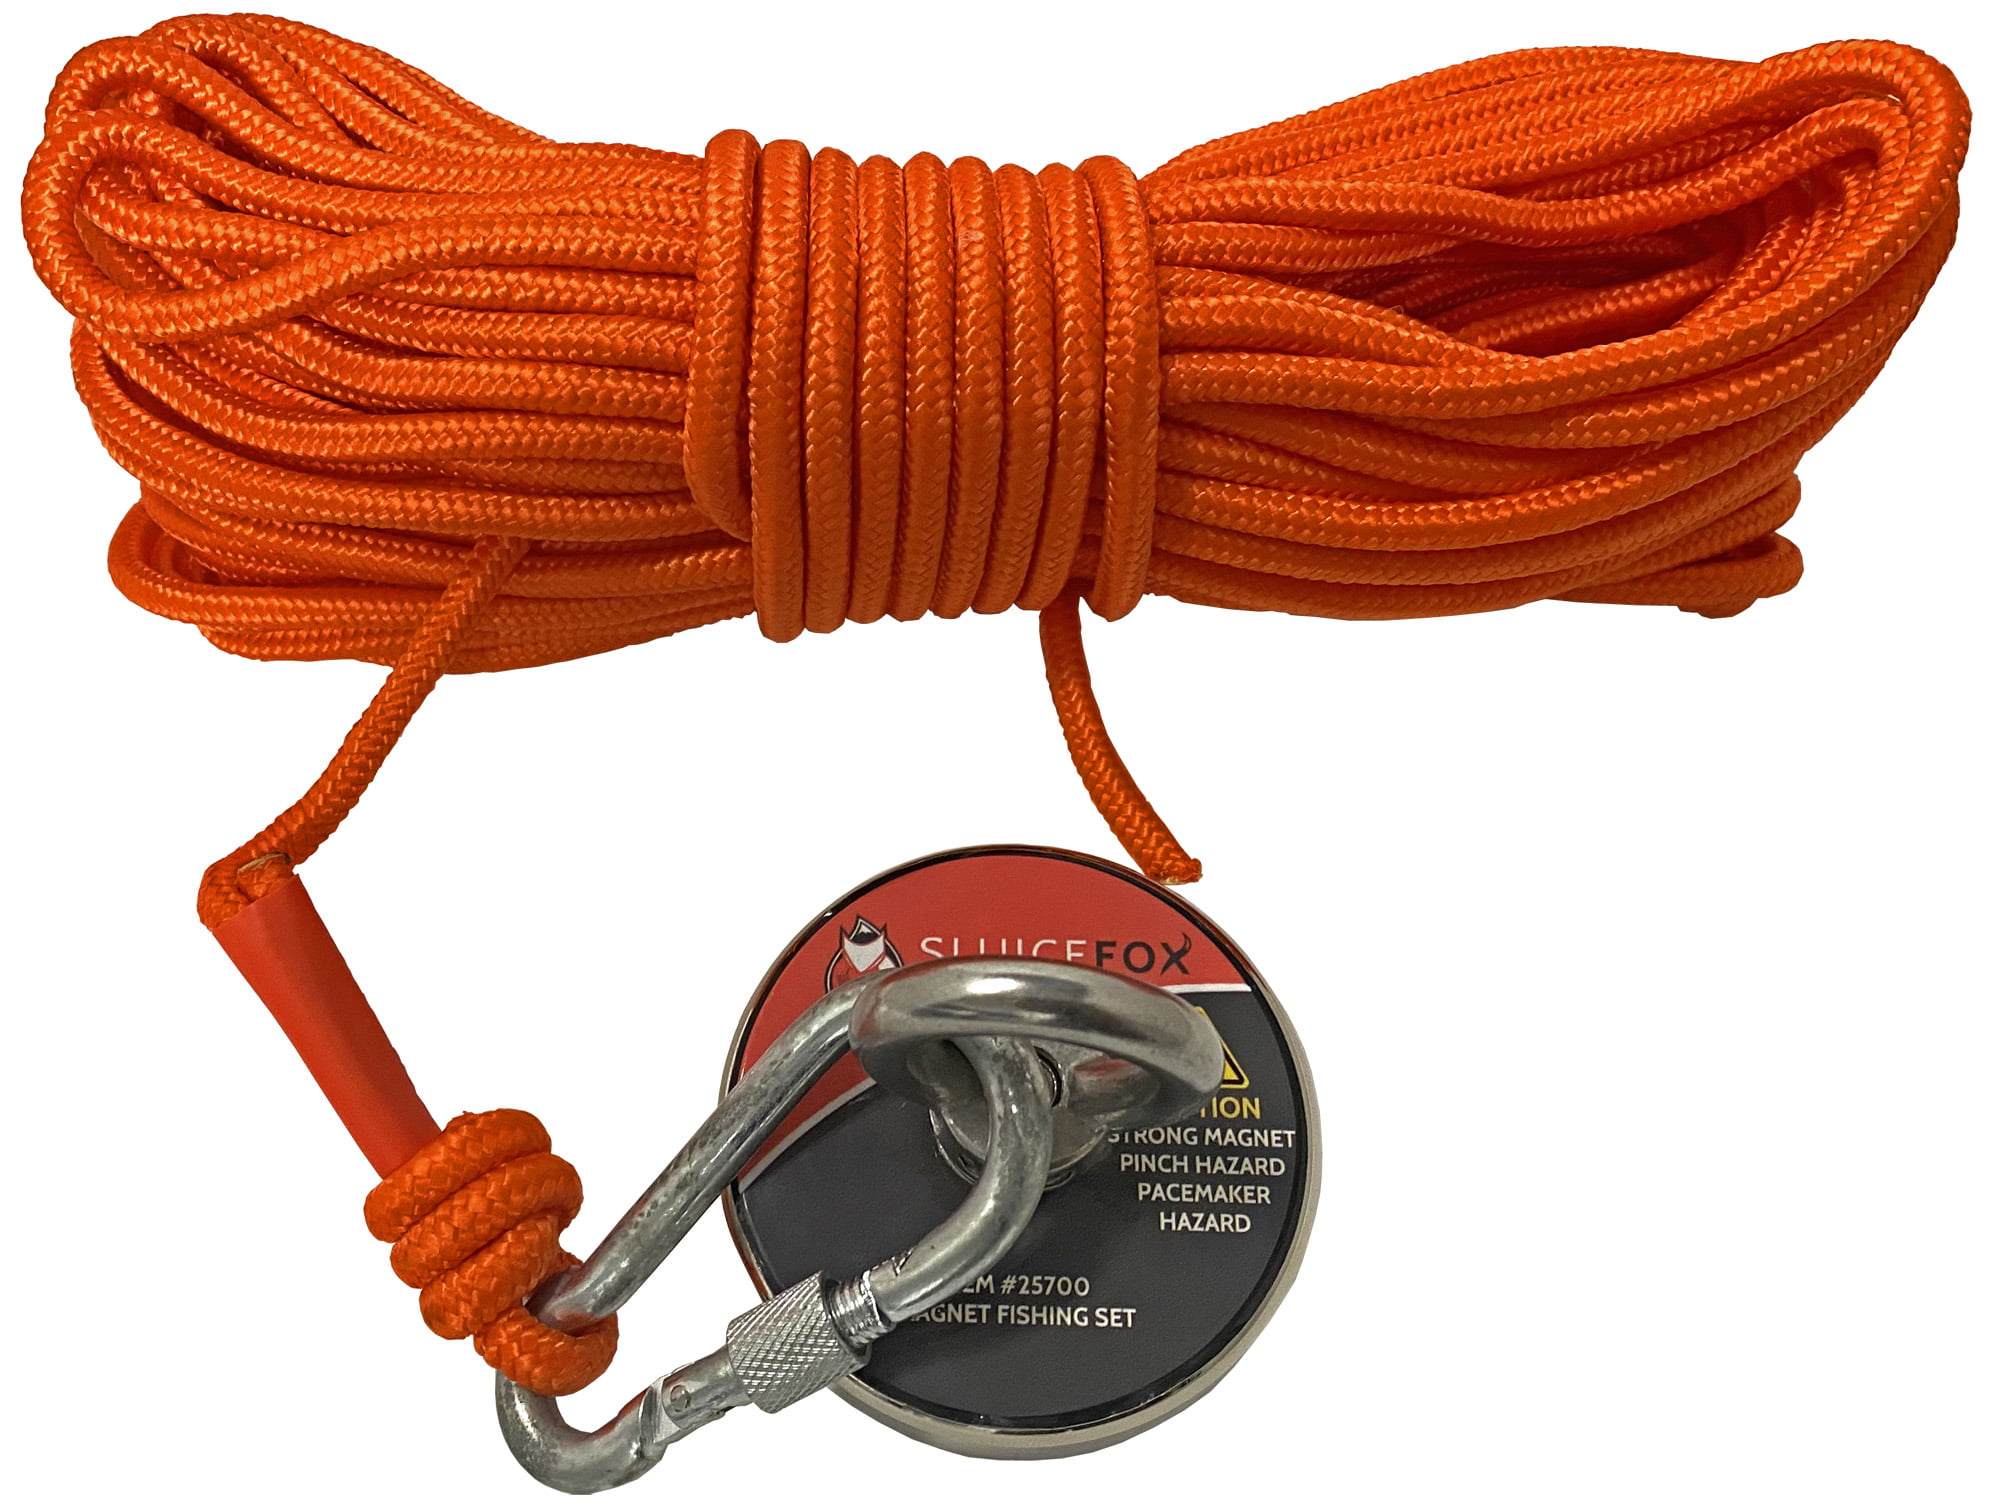 HOTUEEN Rock Climbing Rope Magnet Fishing Rope with Carabiner Nylon Rope Safe Durable All Purpose High Strength Braid Rope fit for Indoor Outdoor Outdoor 5-15M